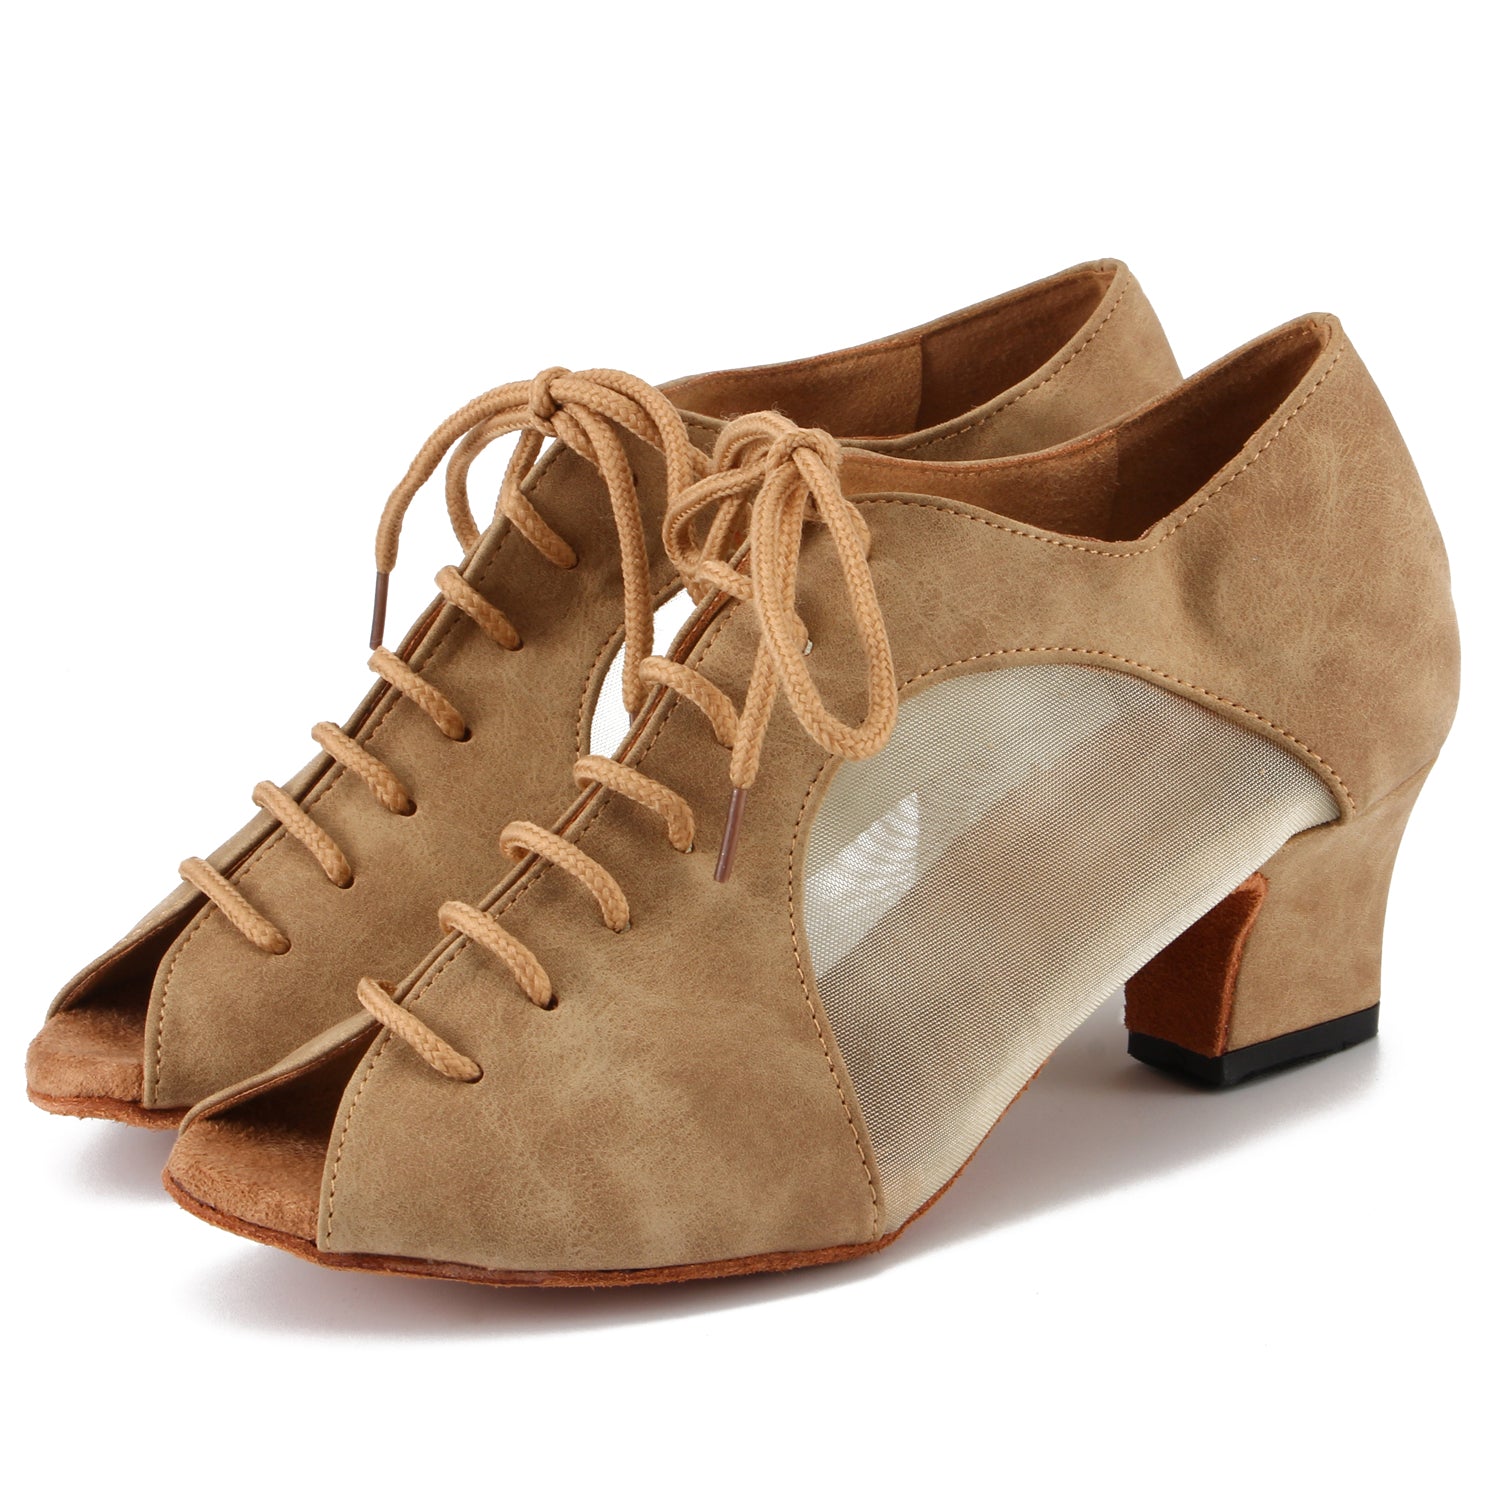 Women Ballroom Dancing Shoes with Suede Sole, Lace-up Open-toe Design in Brown for Tango Latin Practice (PD-3003B)2